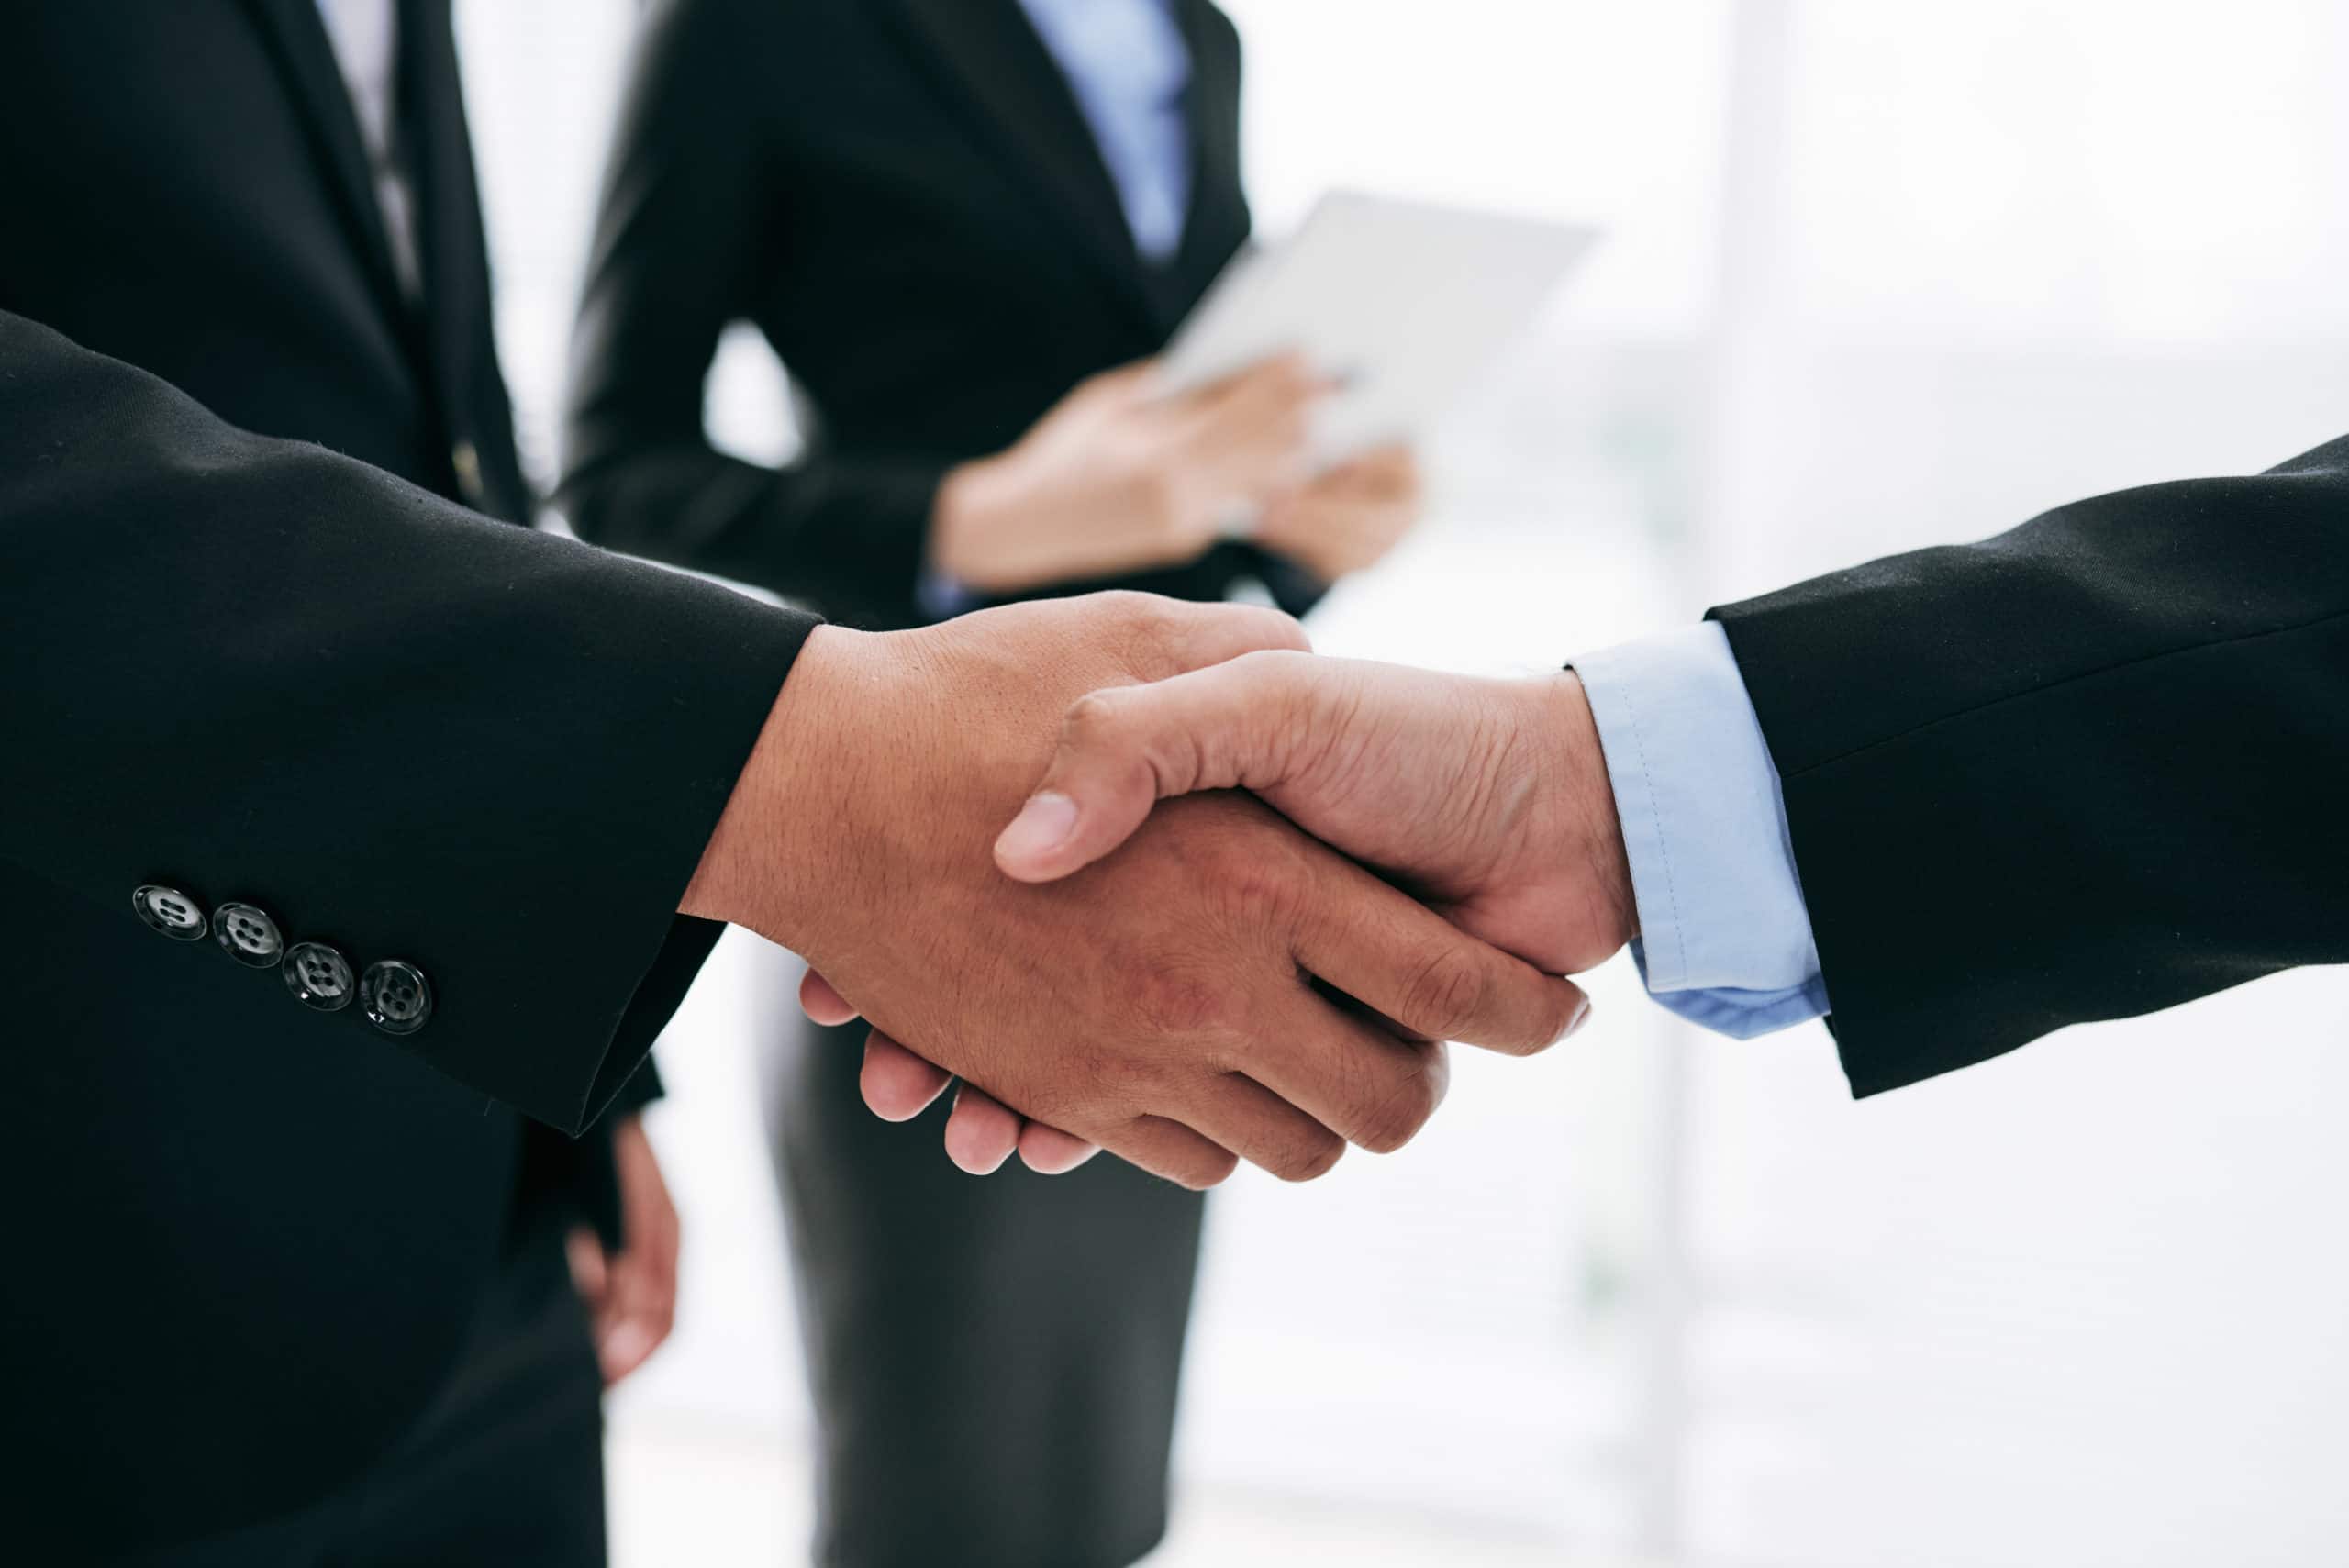 Business people shaking hands after successful deal